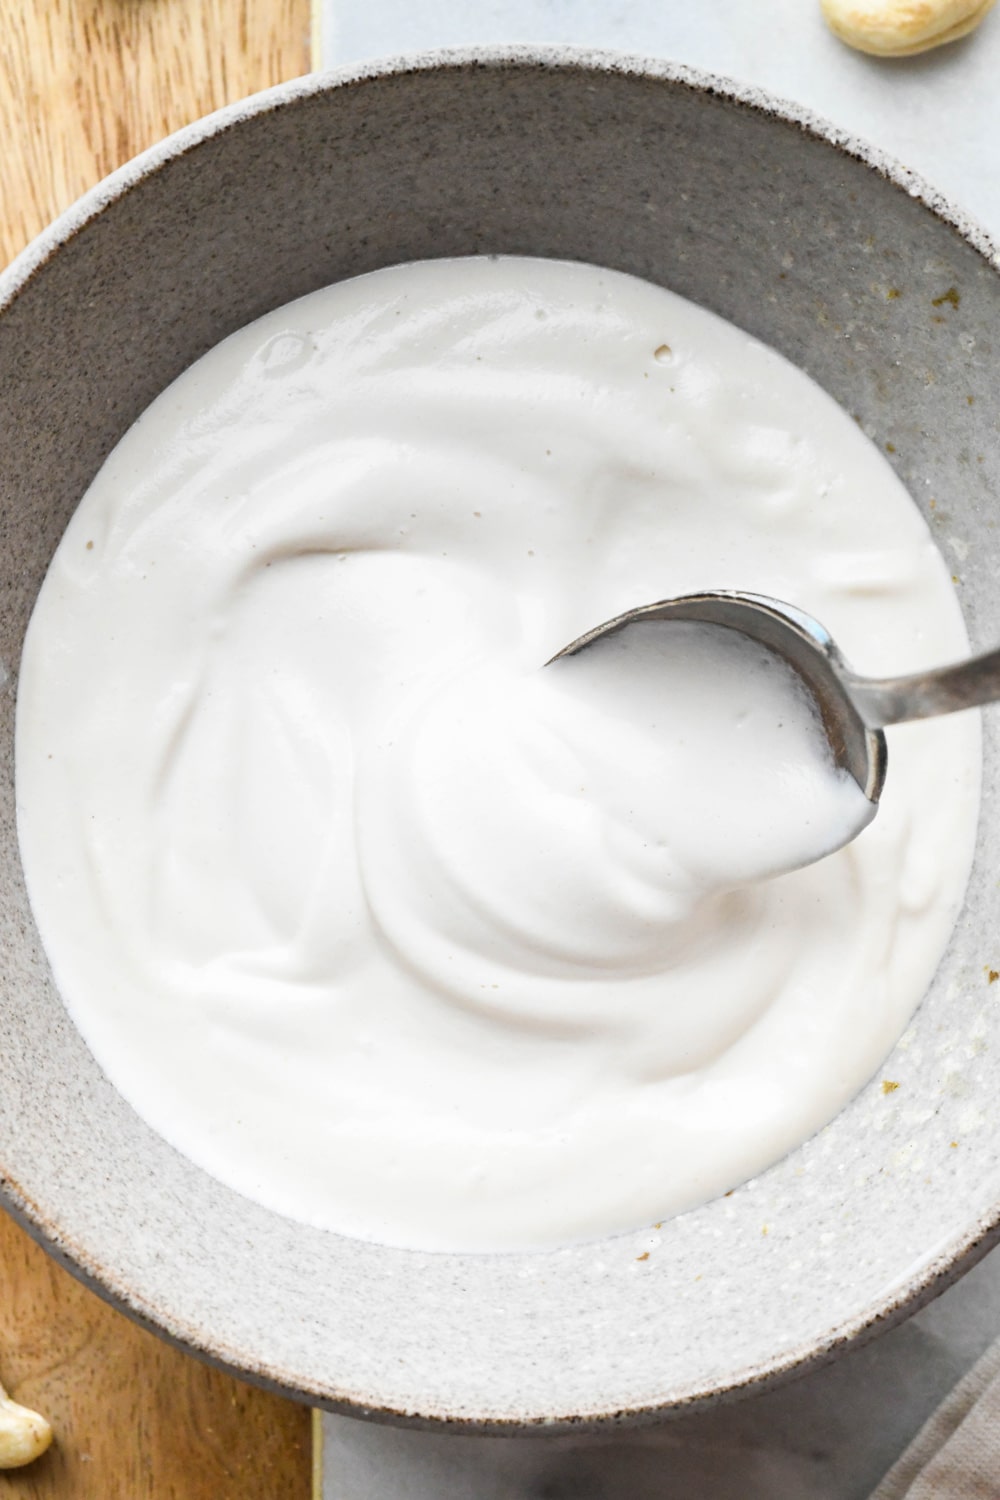 Cashew cream made with 1/2 cup of water in a grey ceramic bowl with a spoon lifting out some of the cream to show the texture.